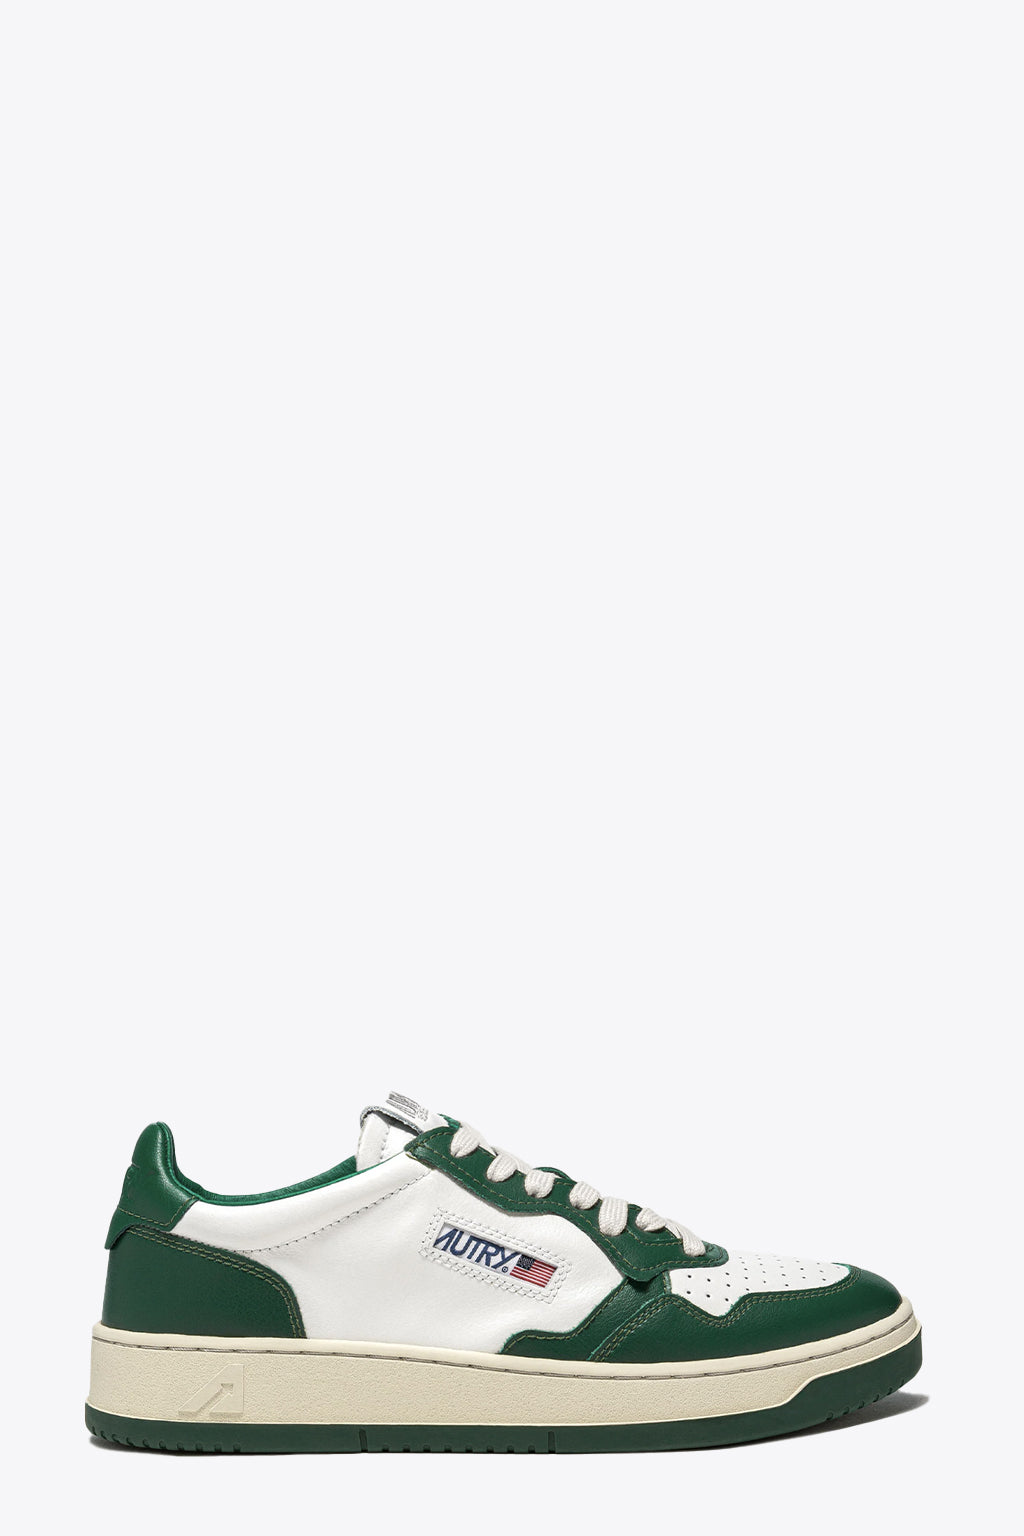 alt-image__Green-and-white-leather-low-sneaker---Medalist